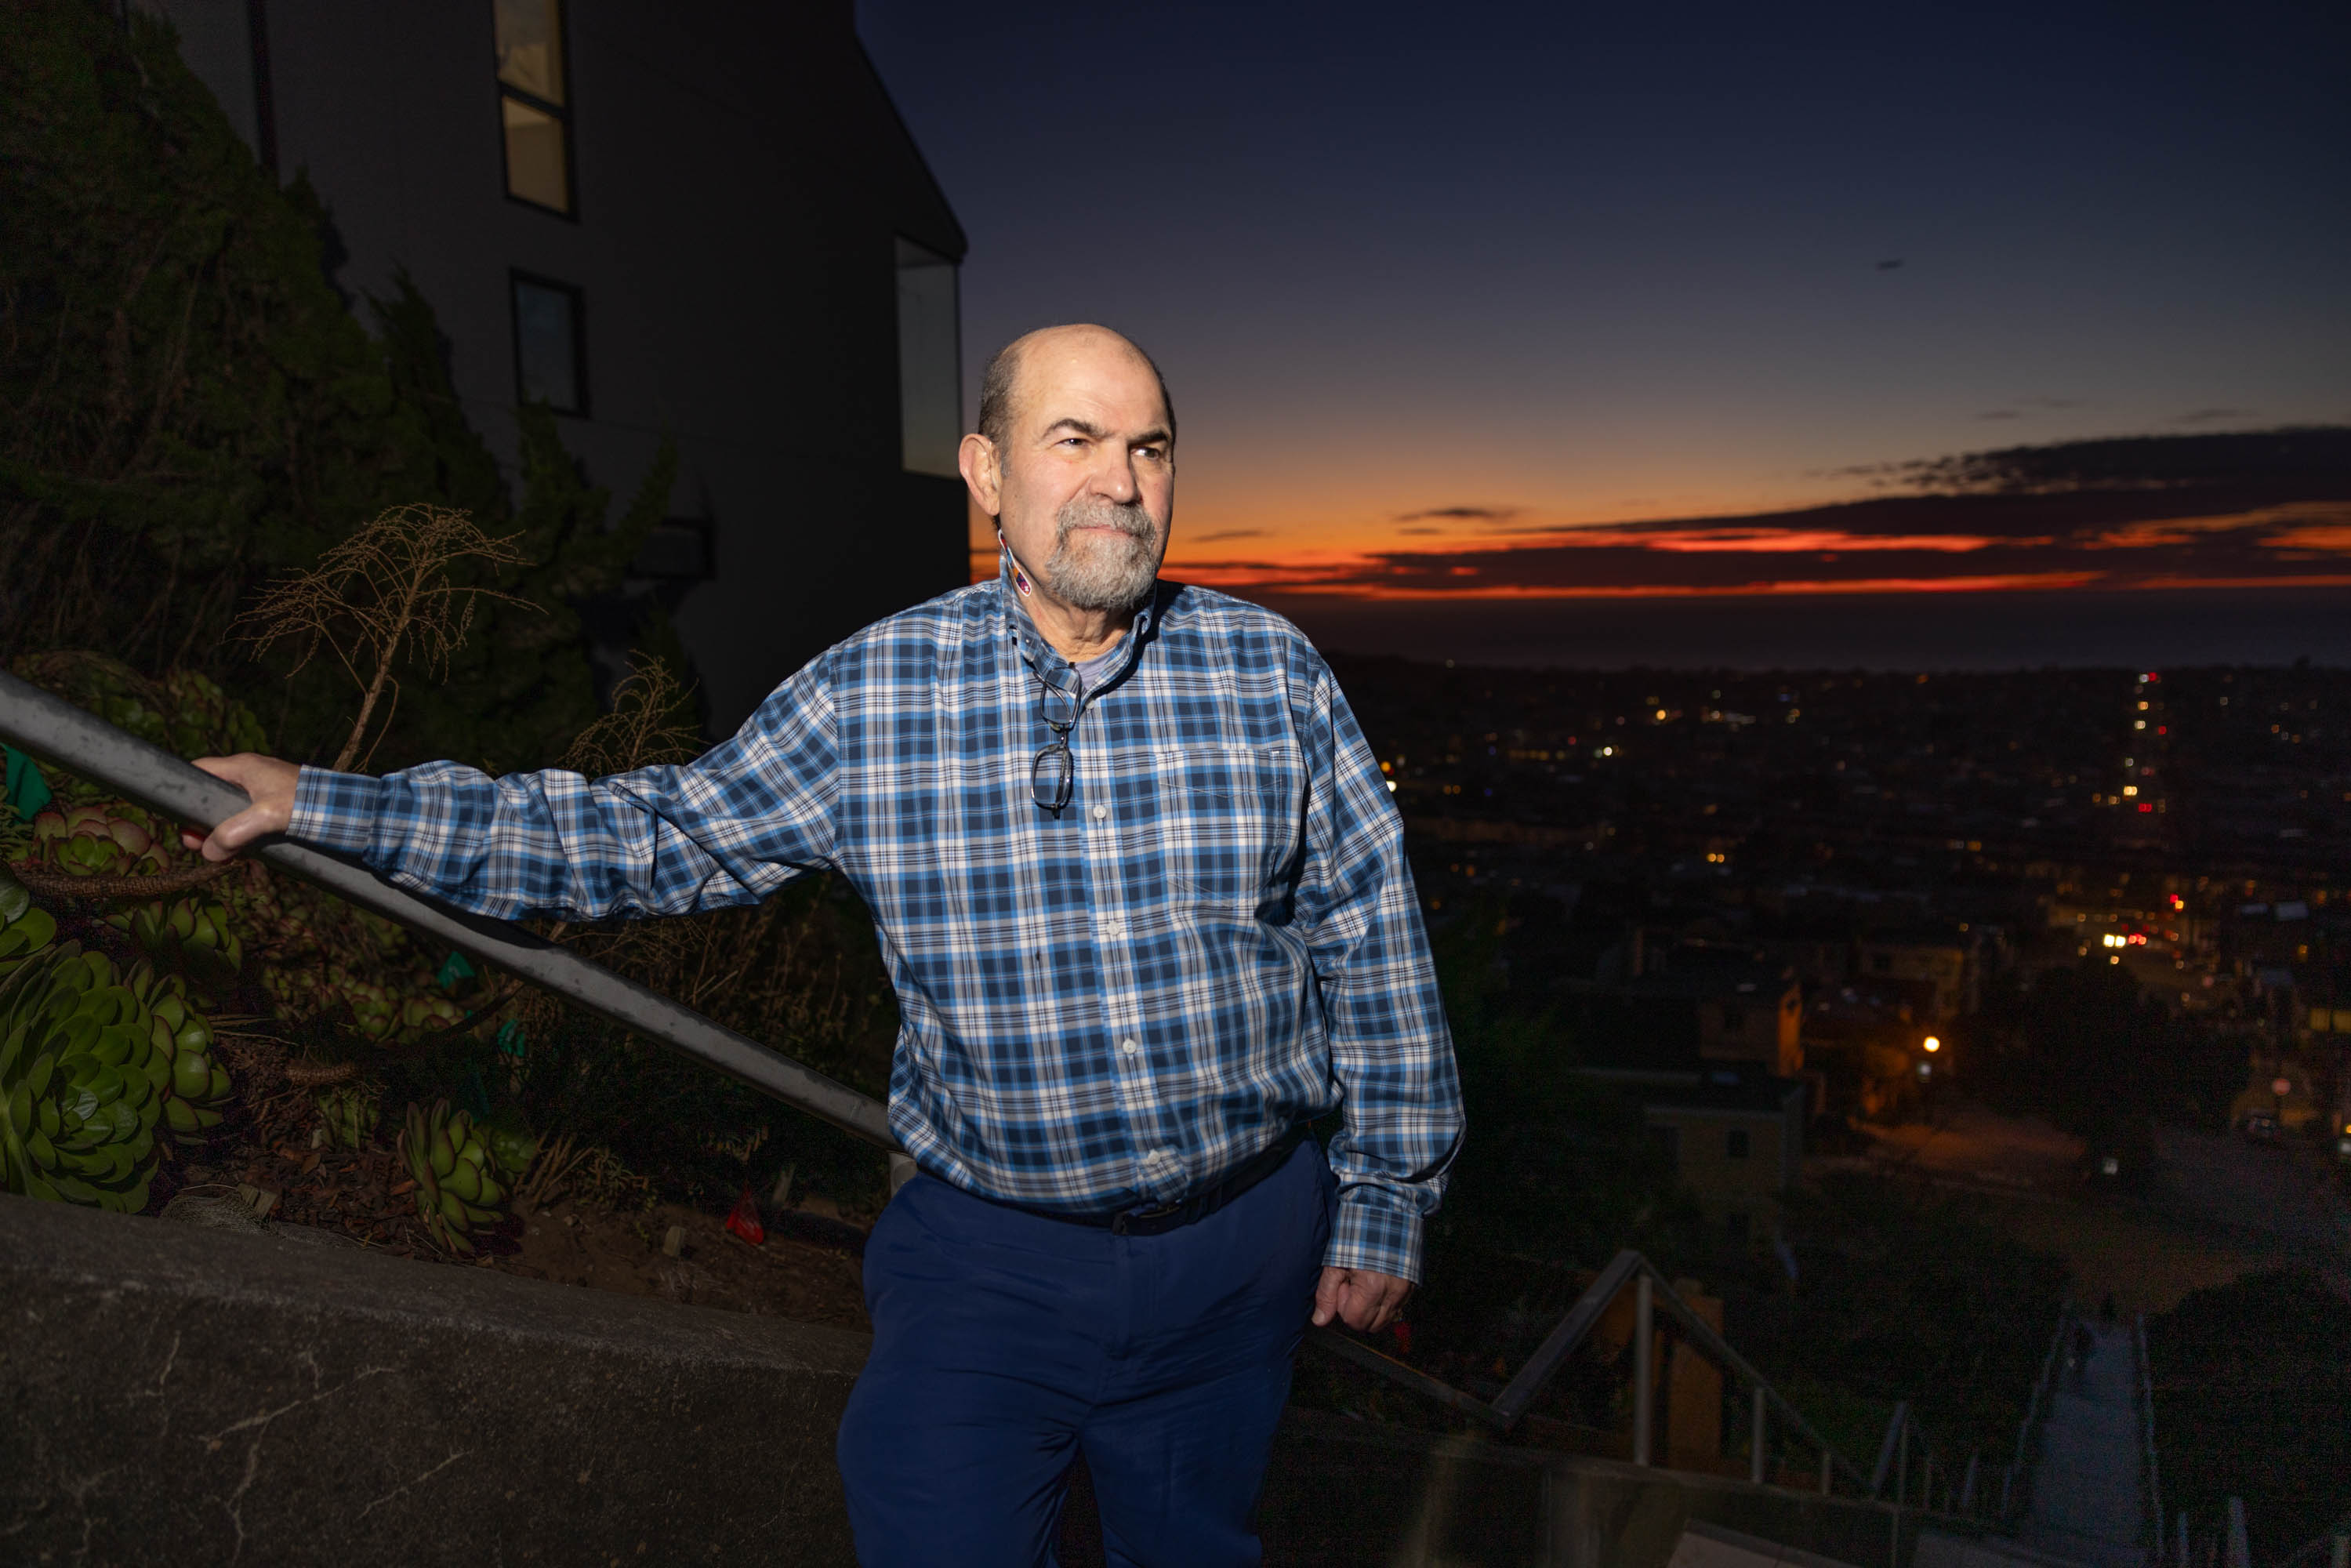 A man poses for a portrait on a long staircase during a sunset in the background.